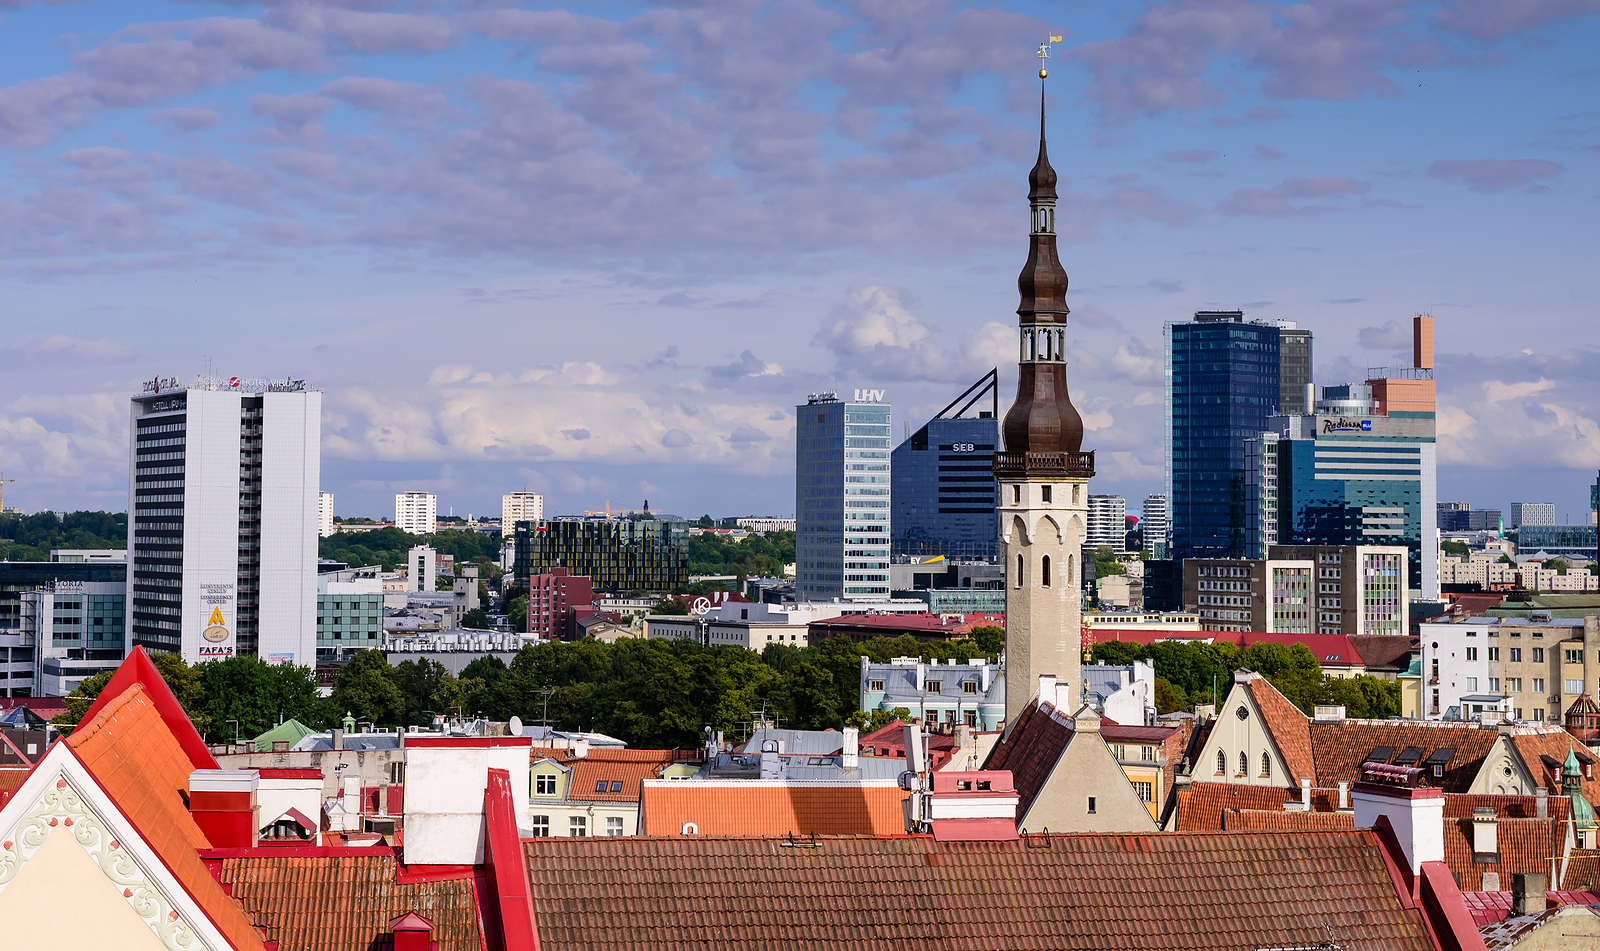 Why Estonia And Hungary Were So Reluctant To Agree To OECD s Minimum 